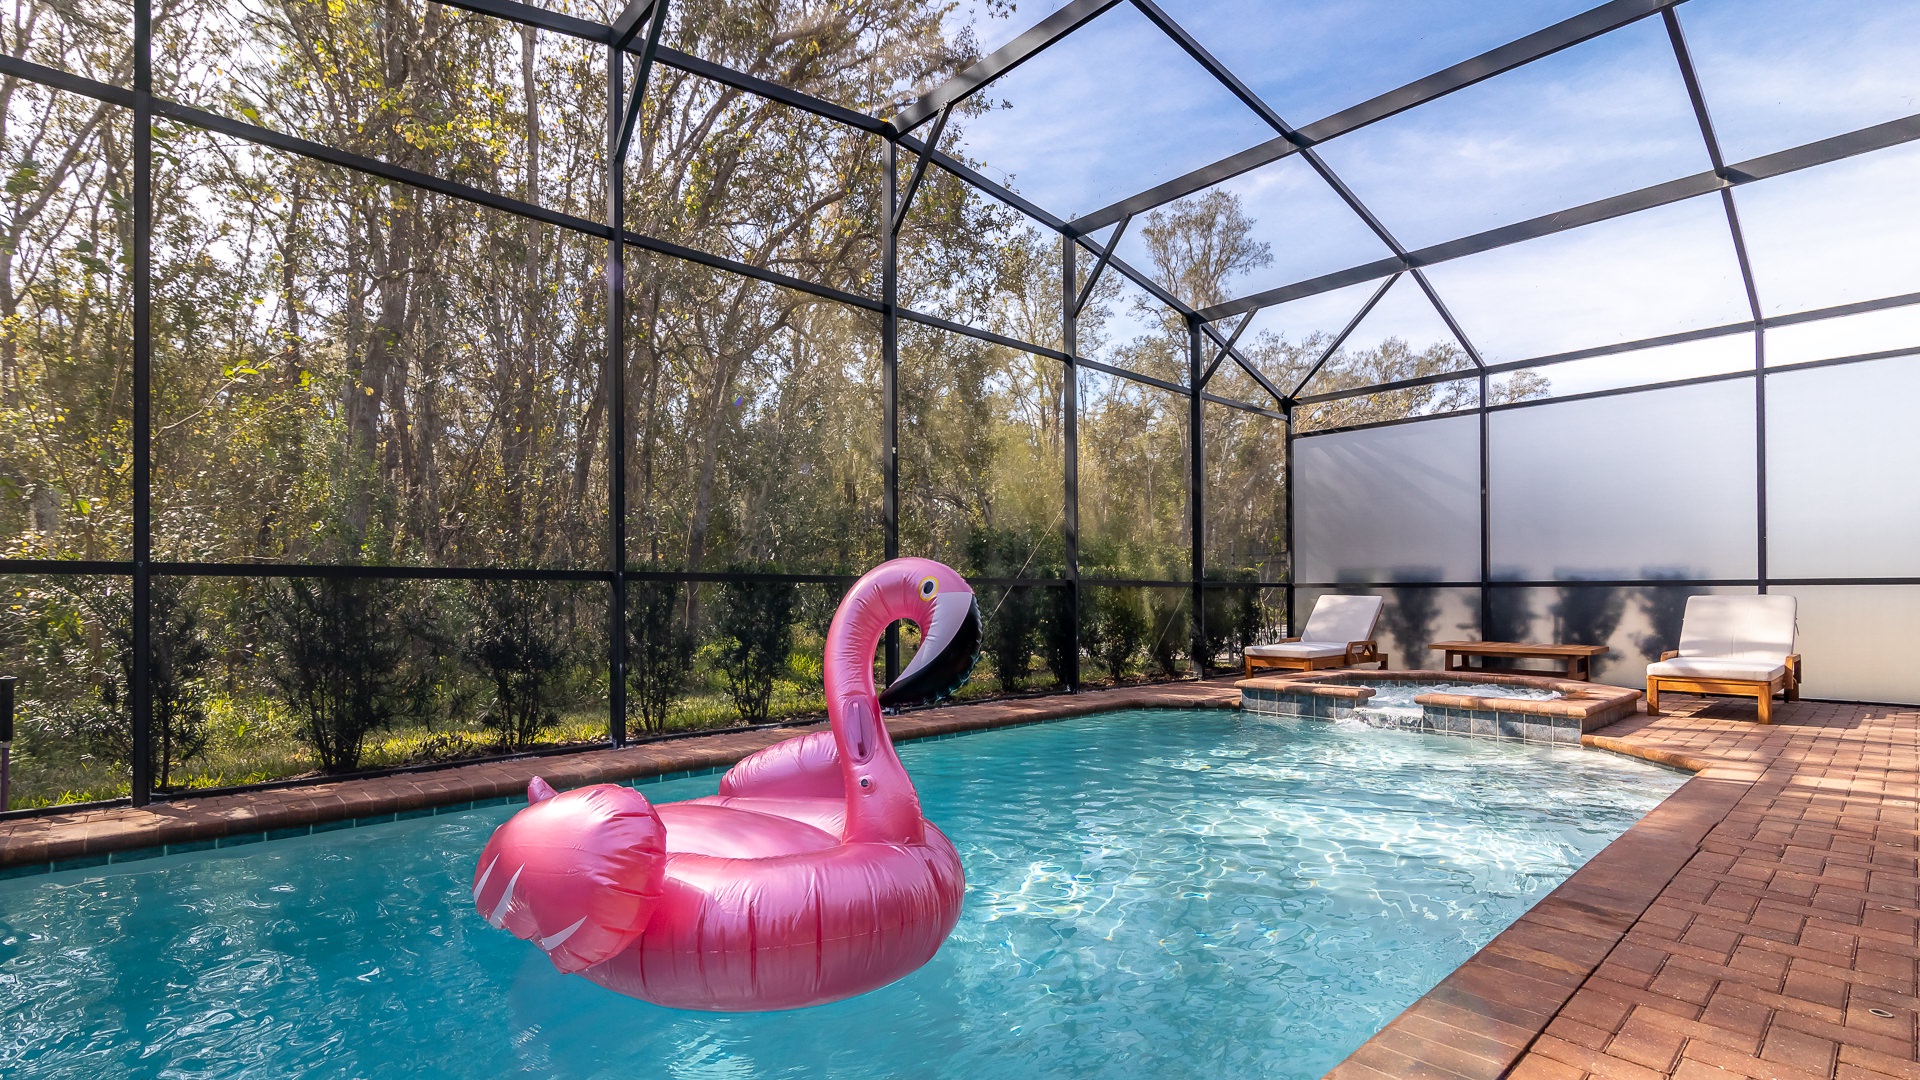 Instagrammable pool with amazing views